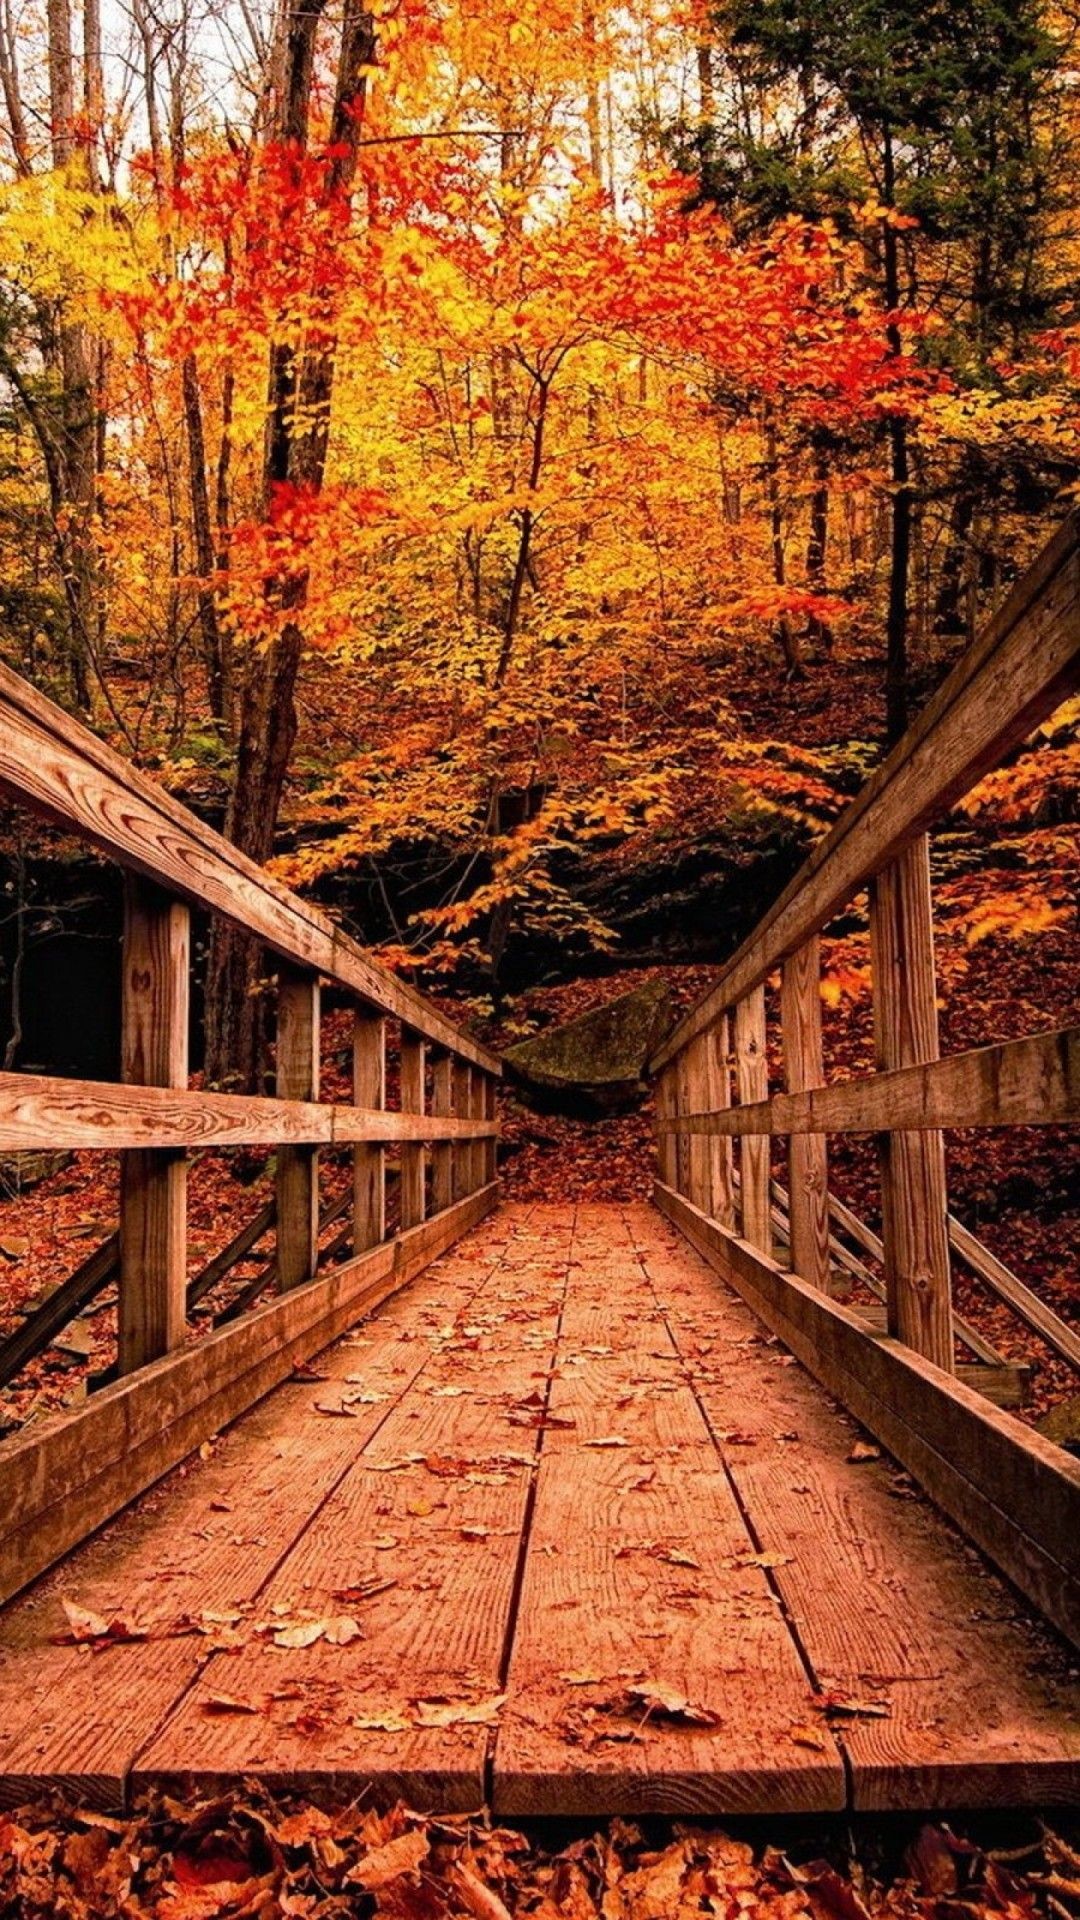 1080x1920 Image for Wood Bridge in Autumn Forest HD Wallpaper Android Phone